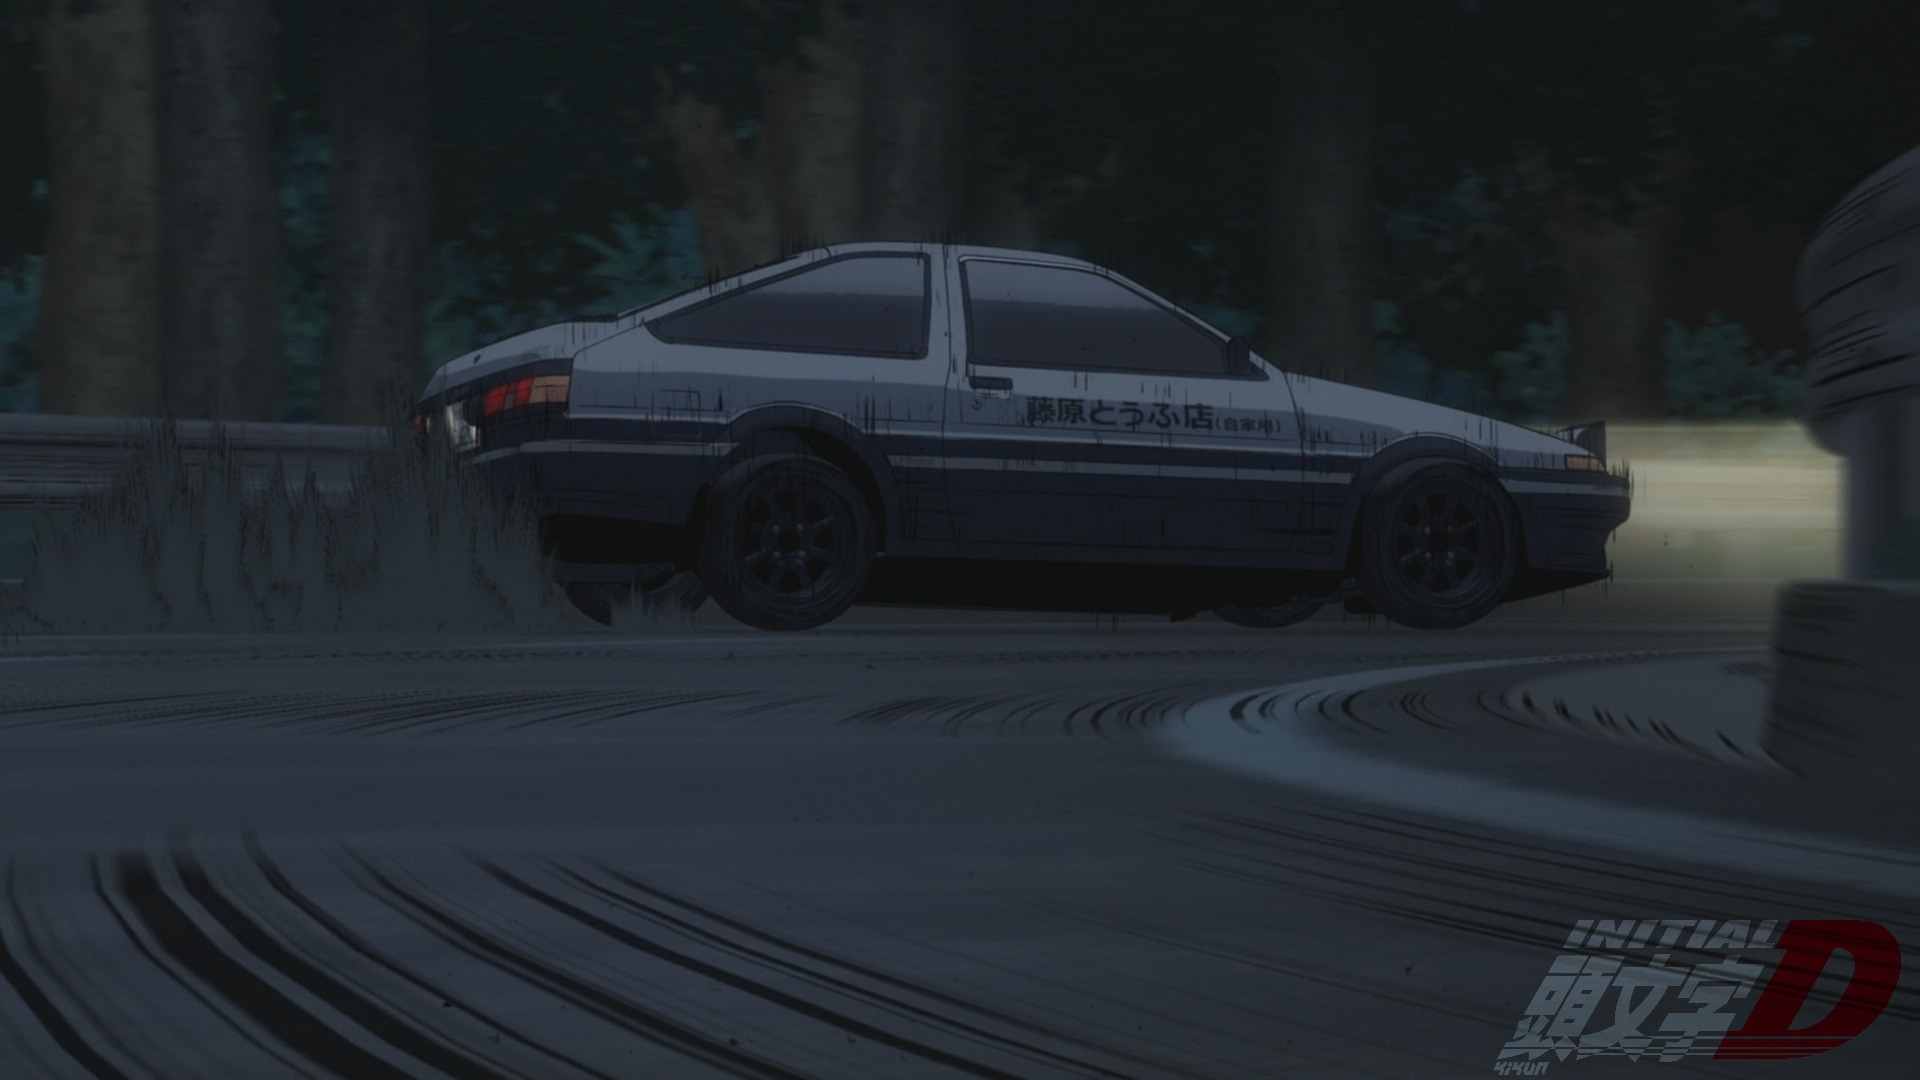 Free Download Initial D Wallpaper Collection Part 1 Album On Imgur 19x1080 For Your Desktop Mobile Tablet Explore 45 Initial Wallpaper Initial Wallpaper Initial D Wallpapers Initial Wallpaper Pictures